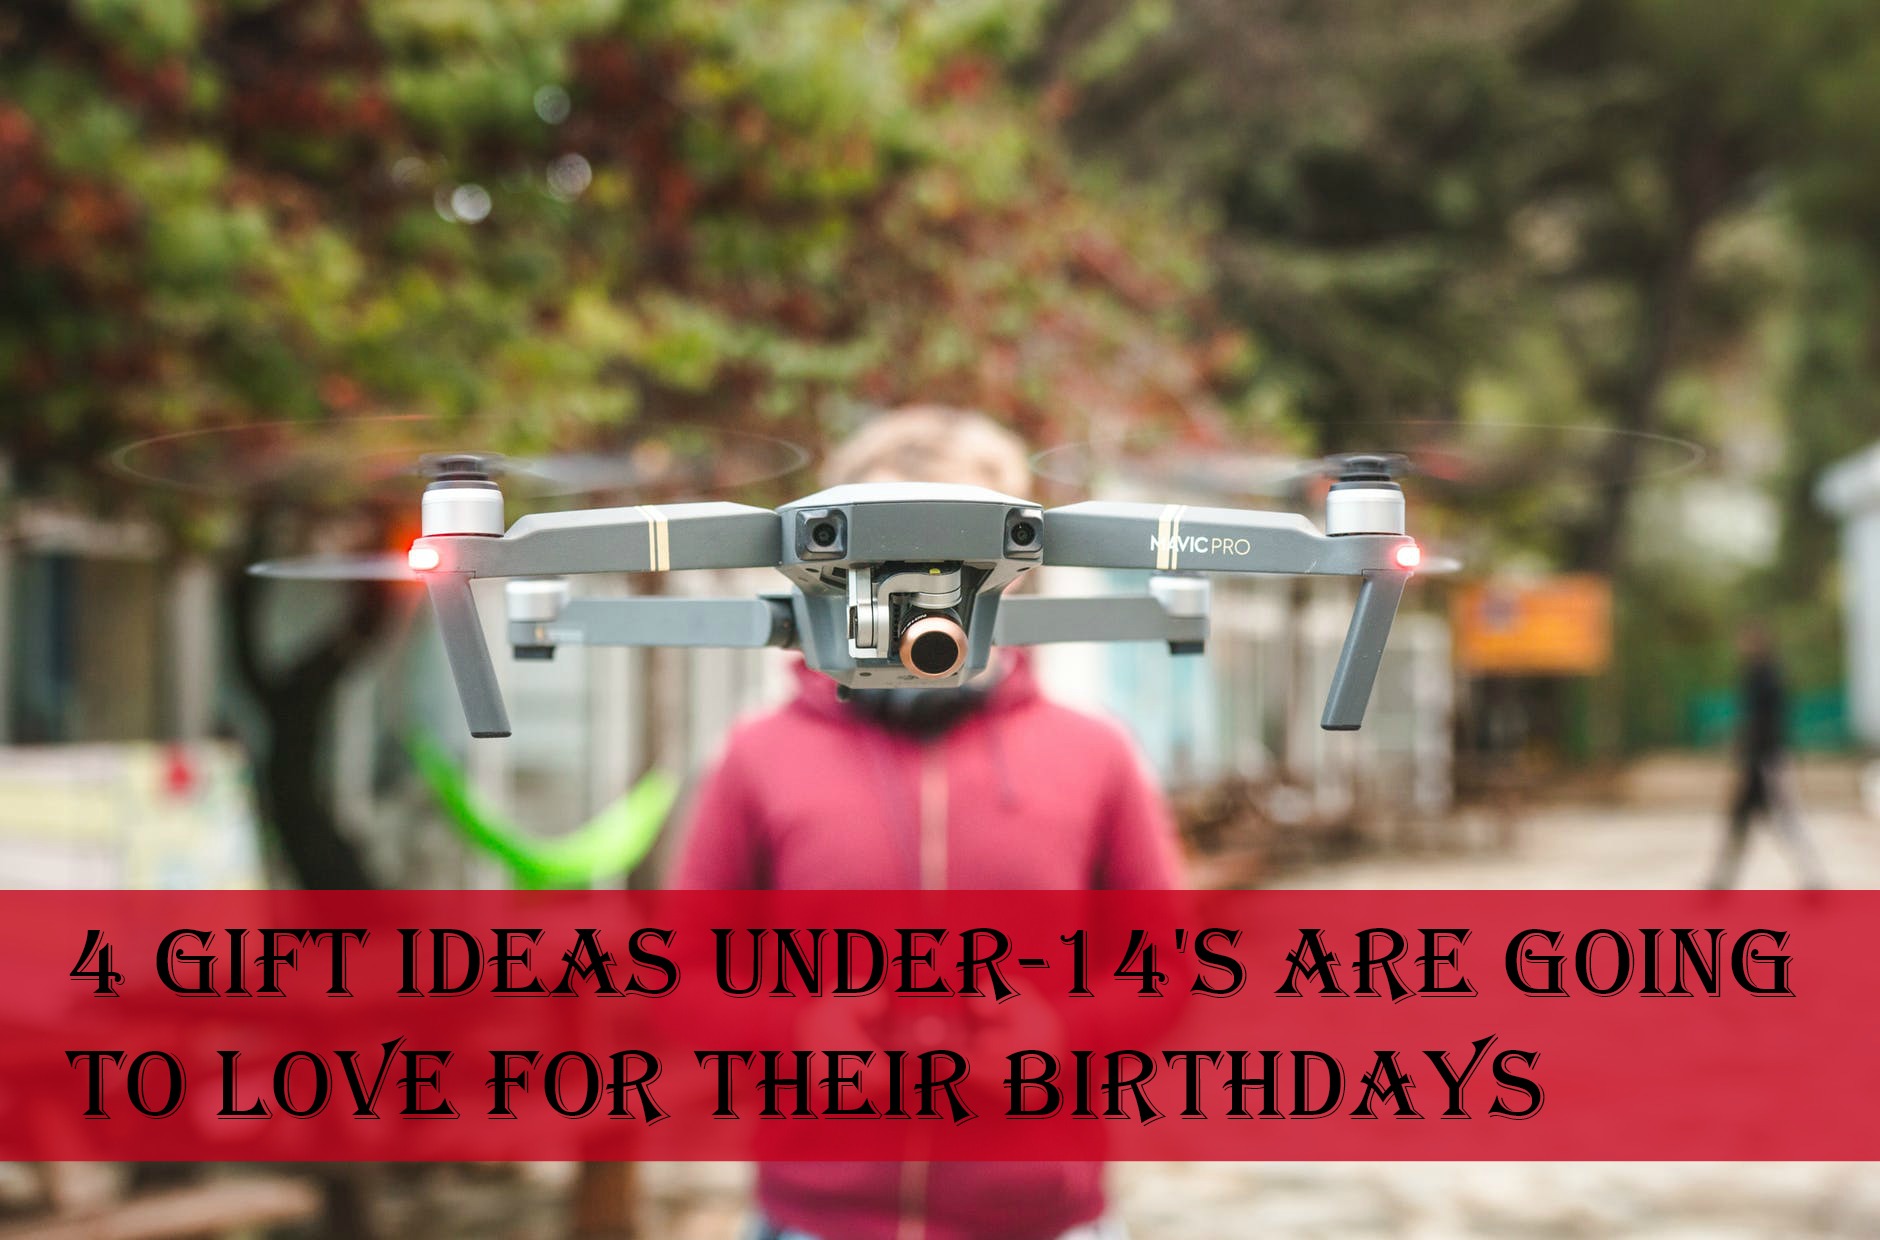 4 Gift Ideas Under-14's Are Going to Love for Their Birthdays